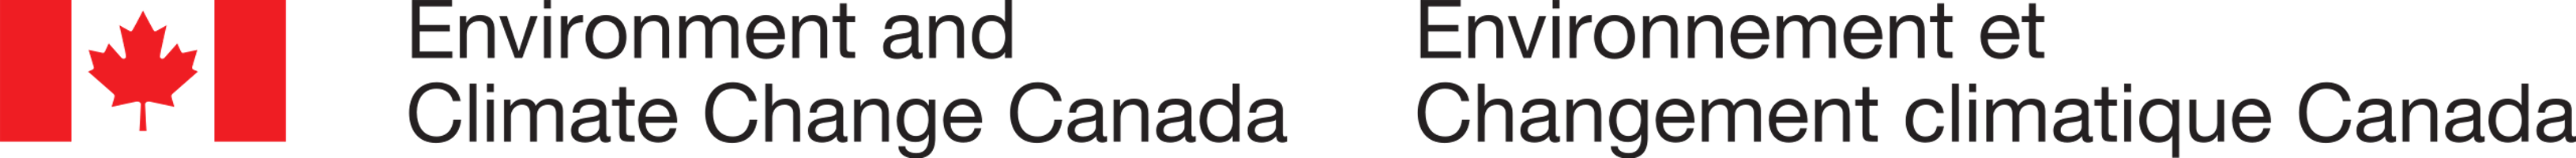 Environment and Climate Change Canada logo.